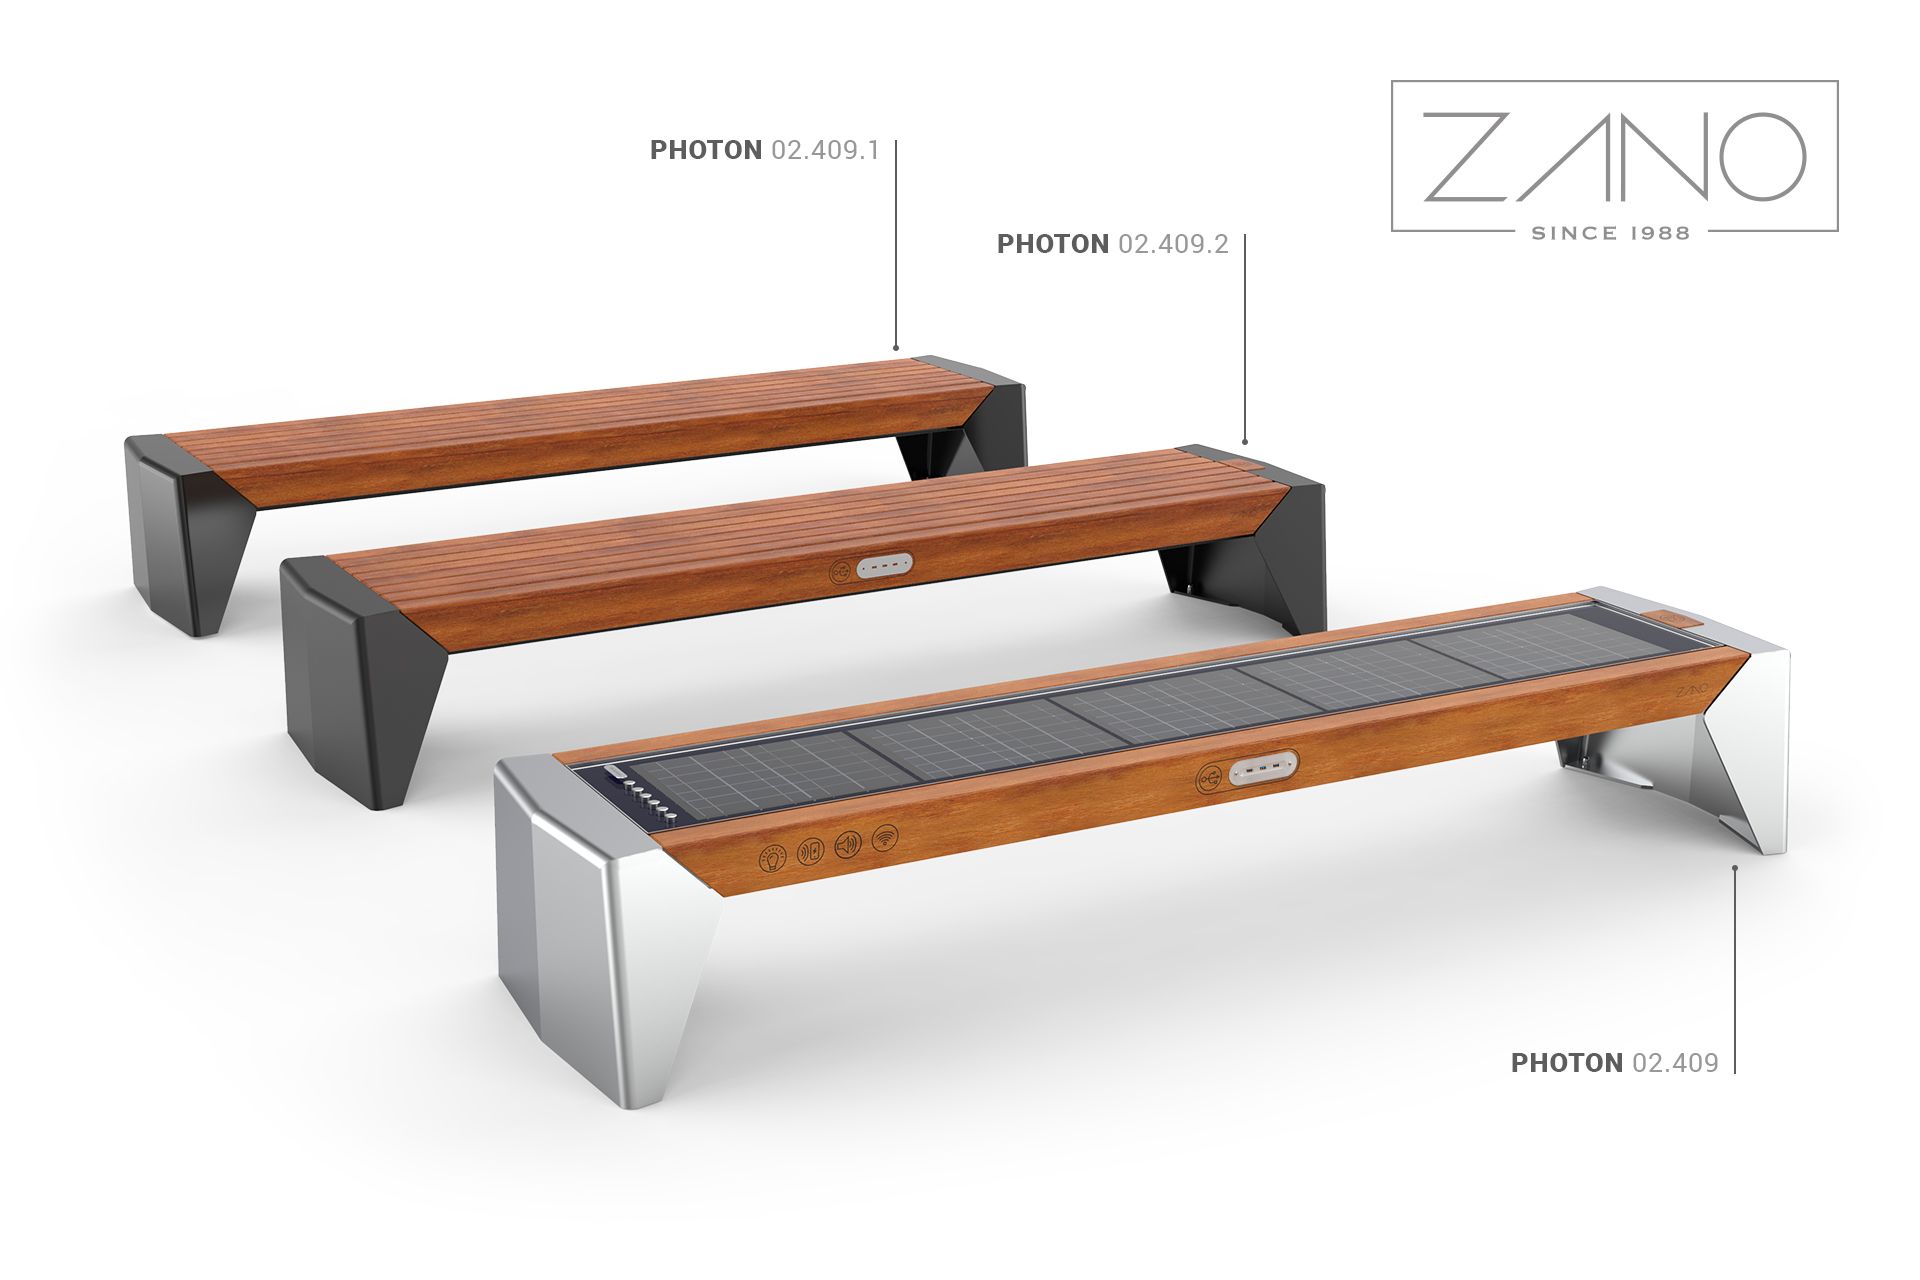 Photon city benches - solar, multimedia and standard